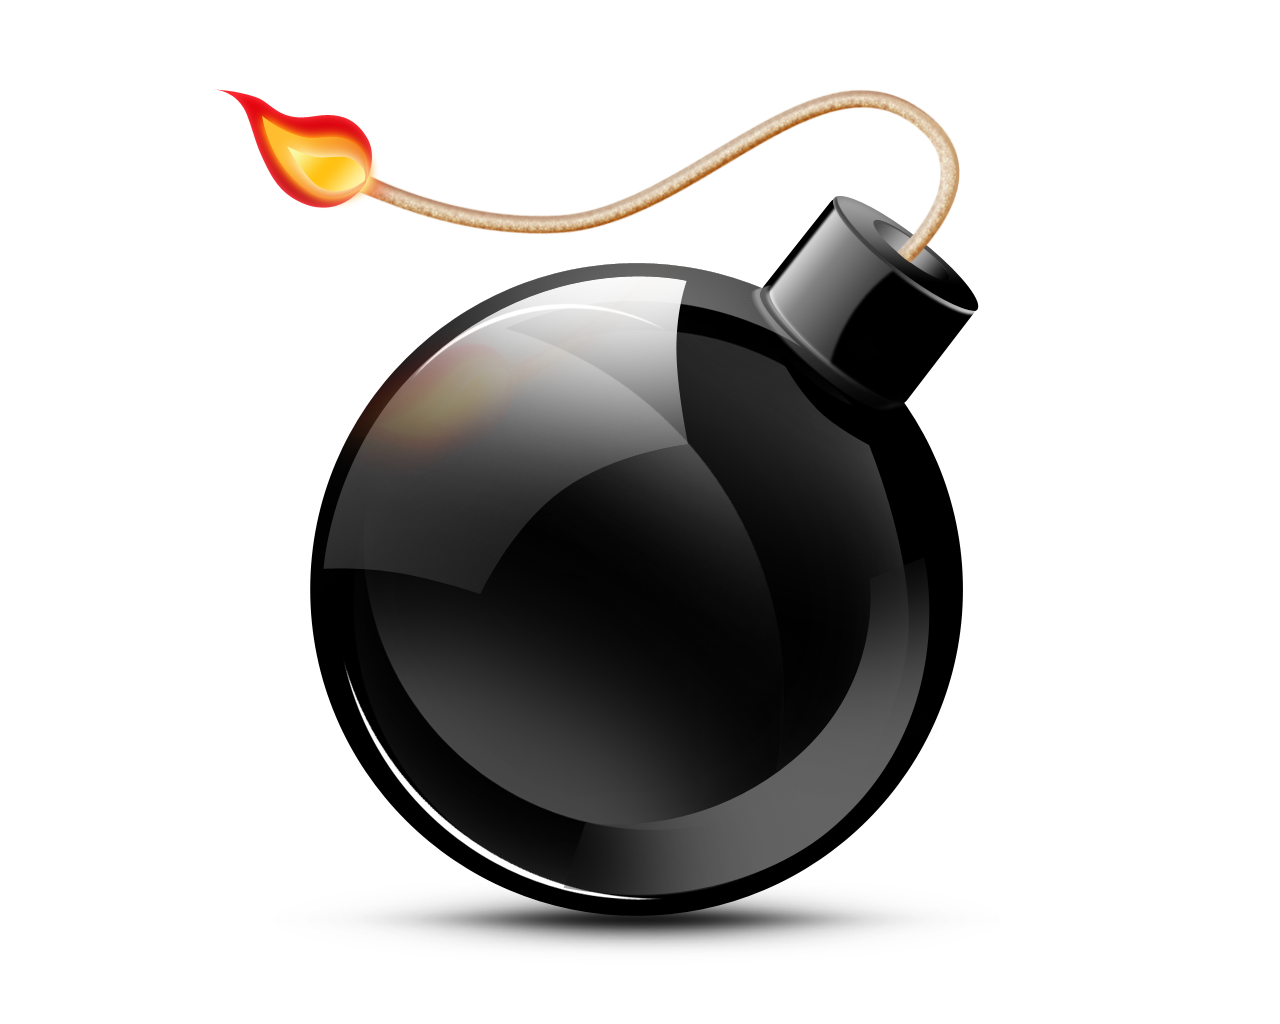 Psd Black Bomb Icon image - vector clip art online, royalty free ...